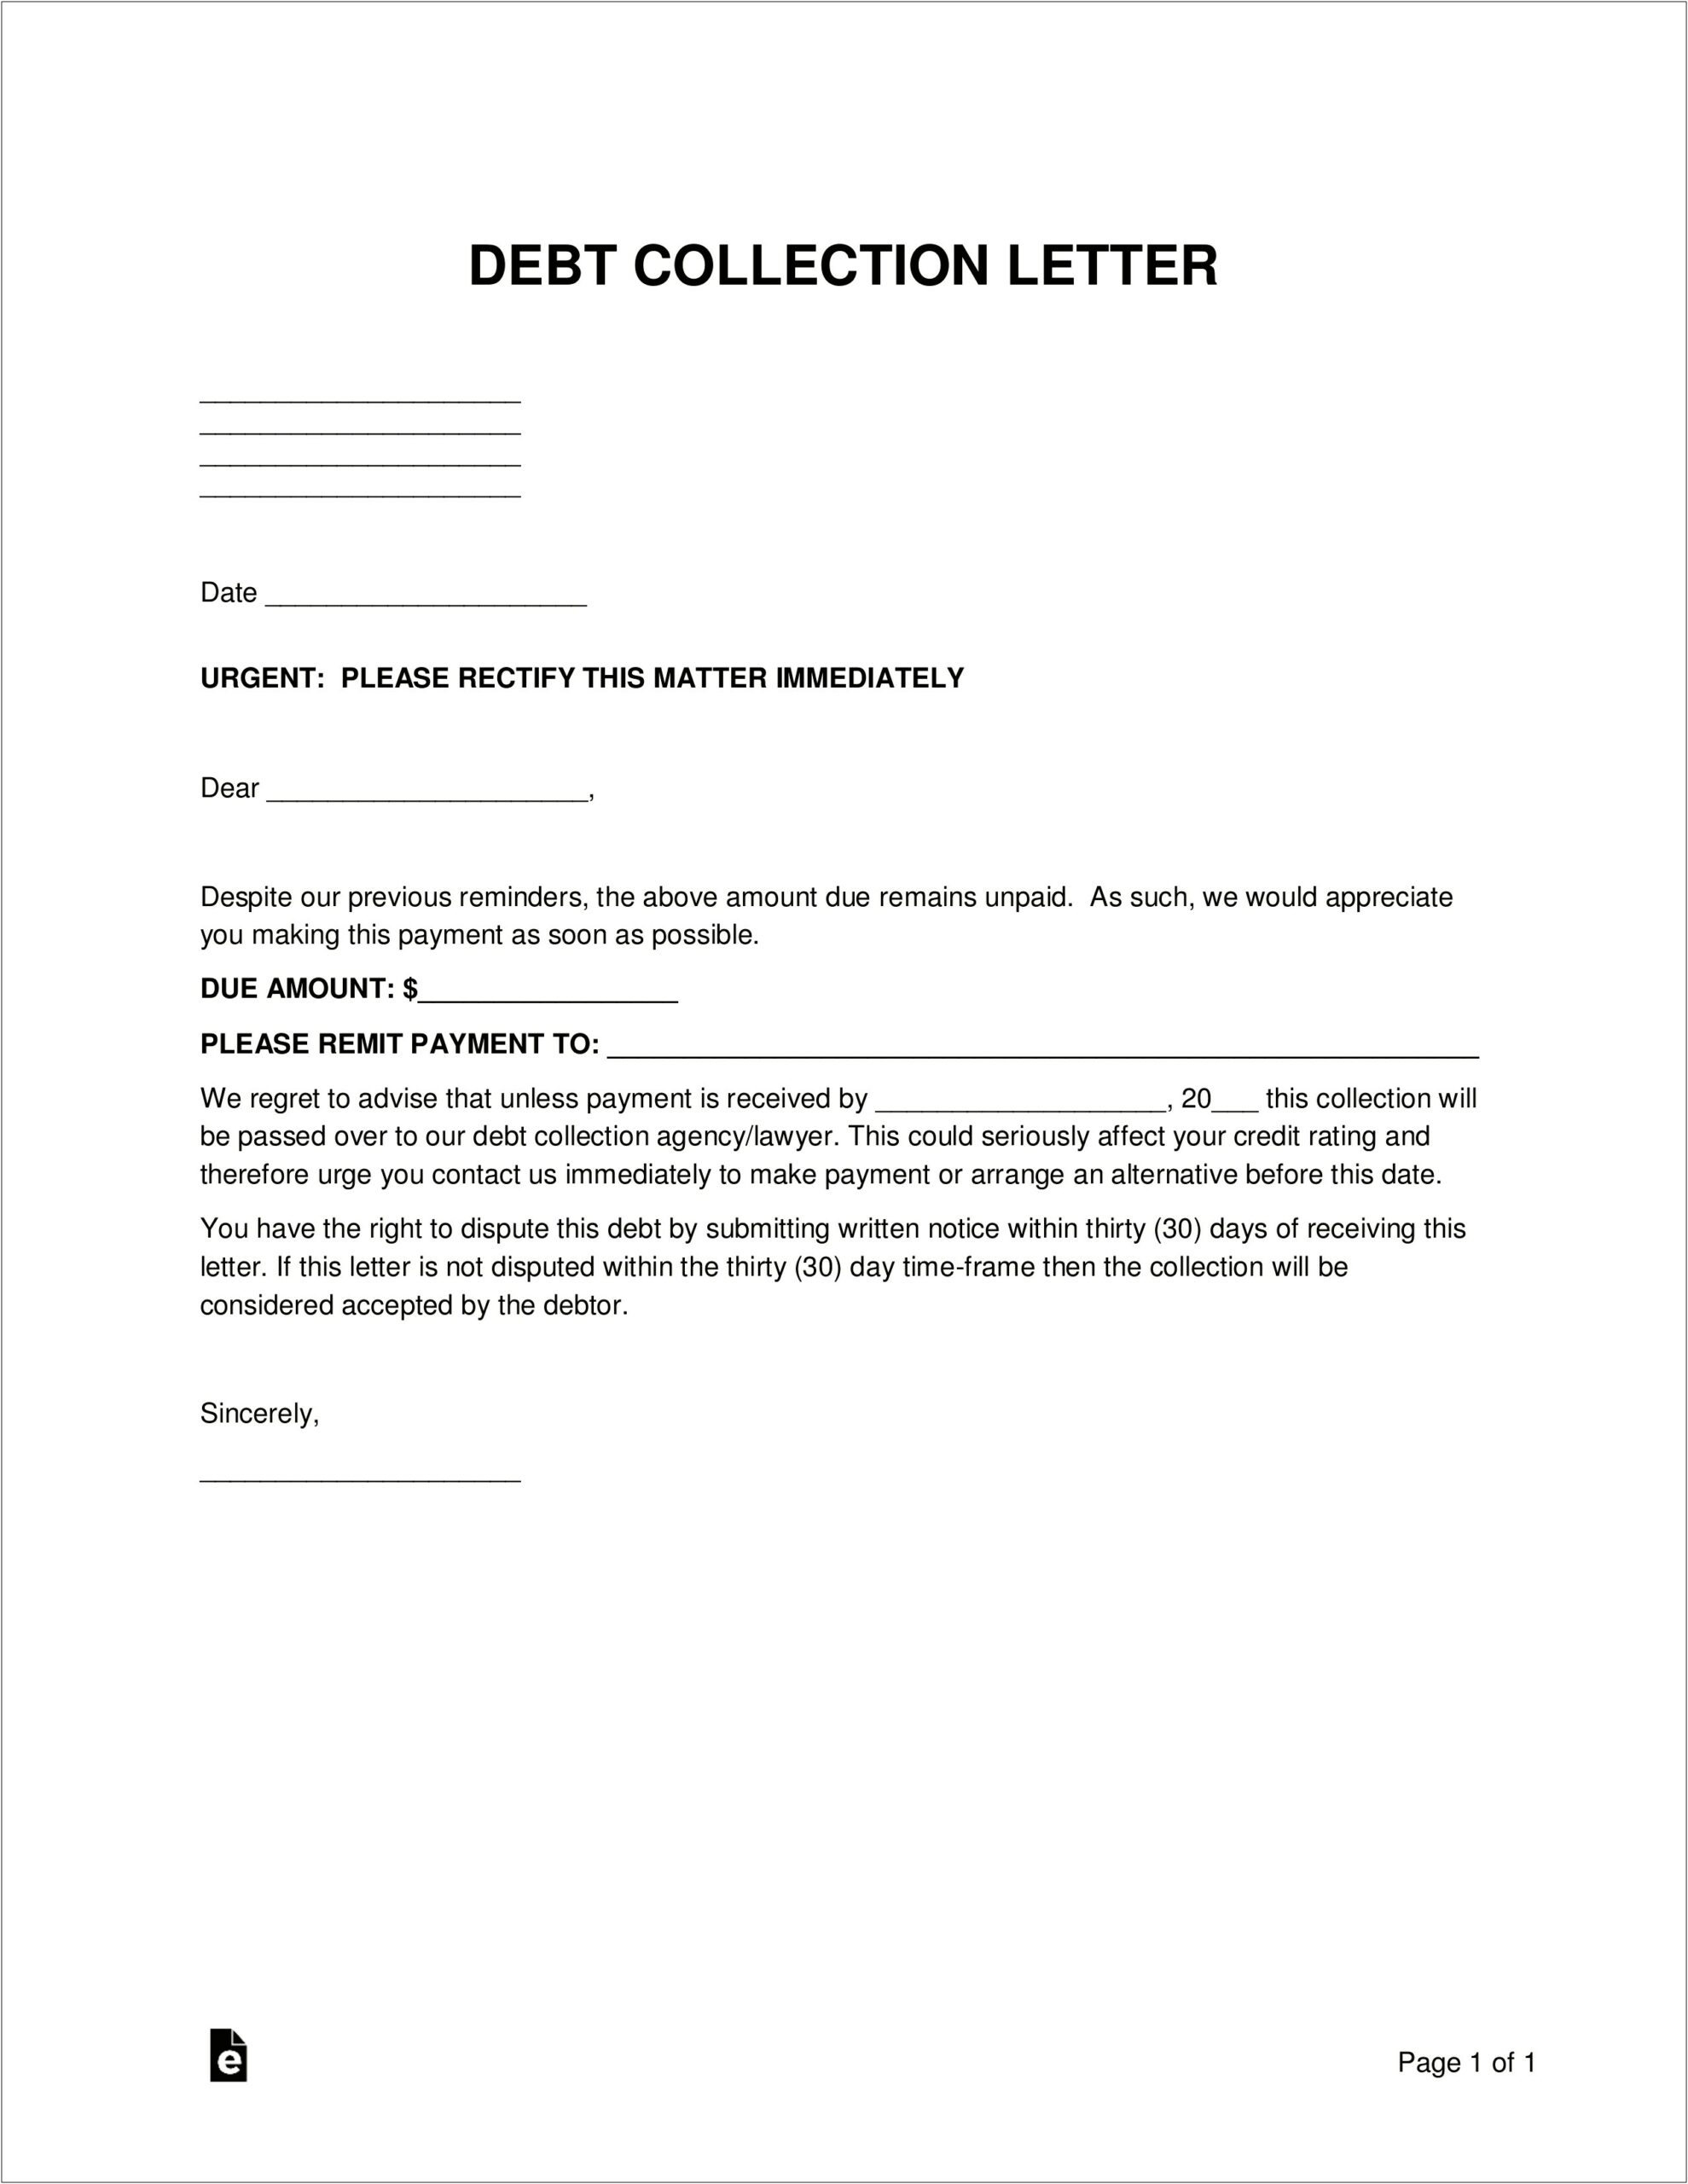 Debt Collector Debt Collection Letter Template